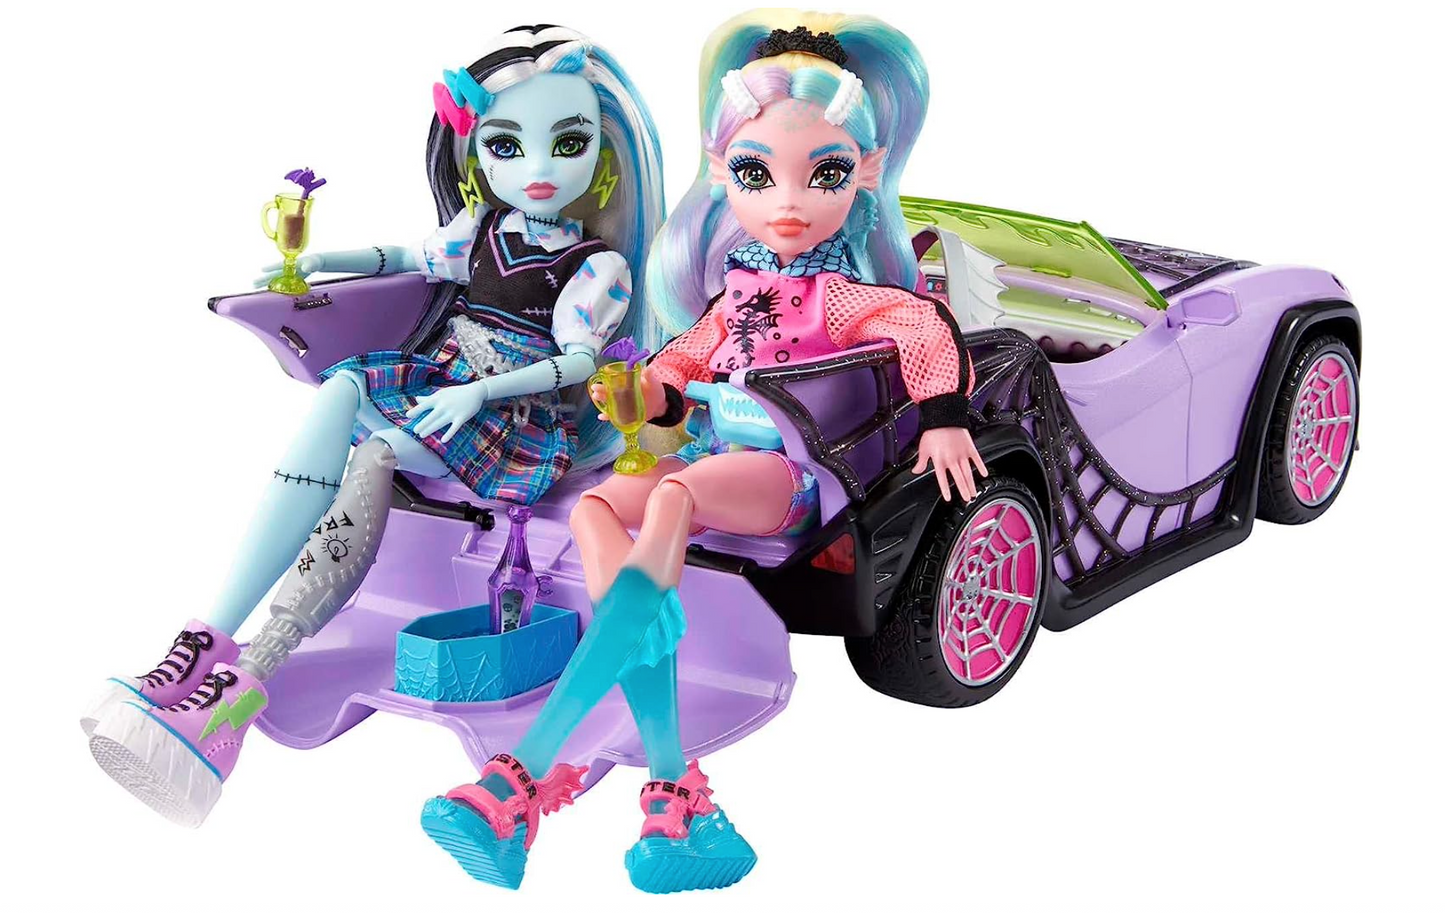 Monster High Toy Car, Ghoul Mobile with Pet and Cooler Accessories, Purple Convertible with Spiderweb Details Large